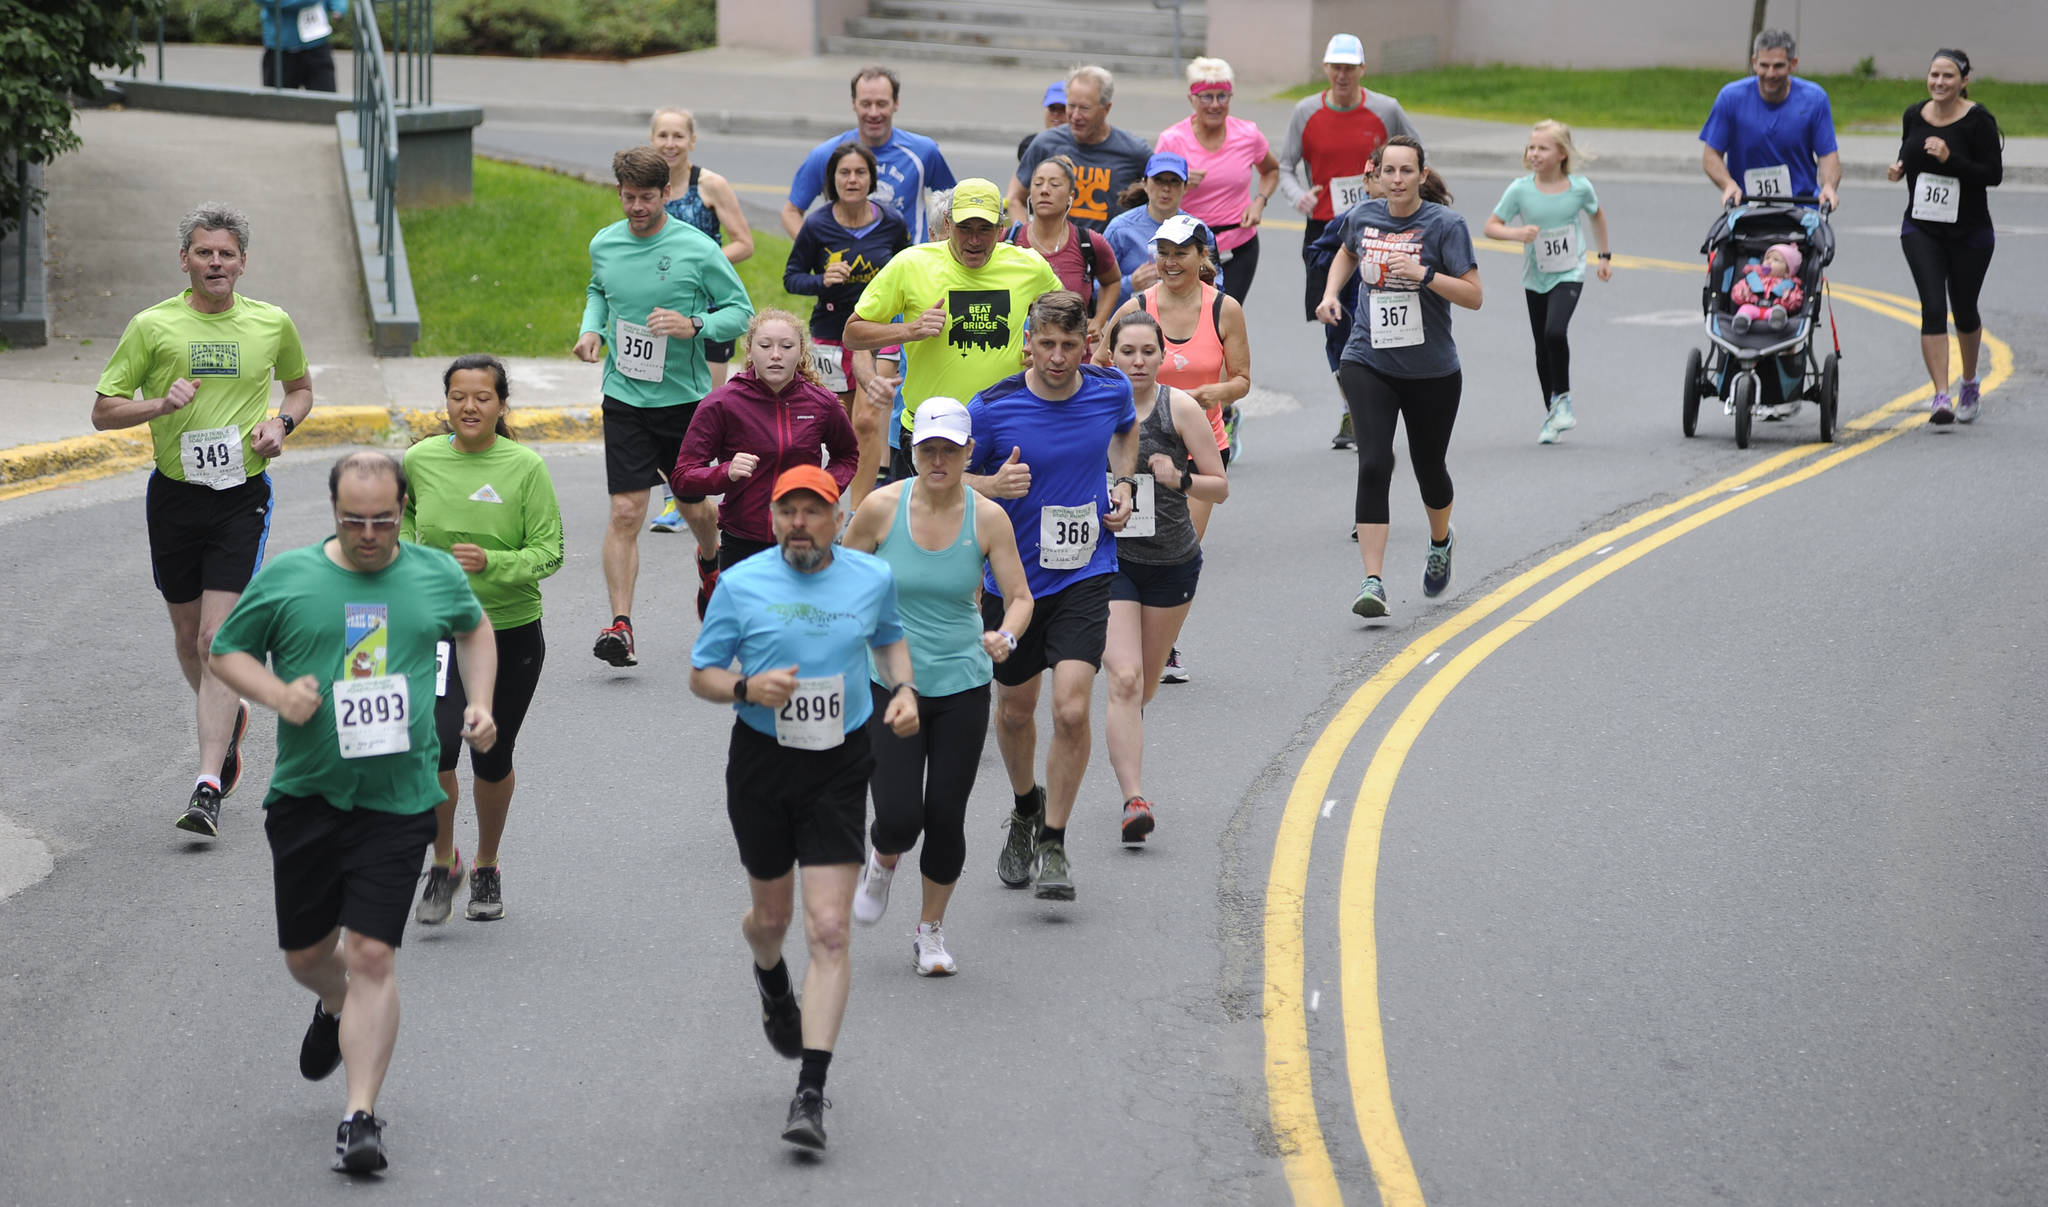 Runners set out on the Juneau Physical Therapy Governor’s Cup 5k on Calhoun Avenue on Saturday morning. (Nolin Ainsworth | Juneau Empire)                                Runners set out on the Juneau Physical Therapy Governor’s Cup 5k on Calhoun Avenue on Saturday morning. (Nolin Ainsworth | Juneau Empire)